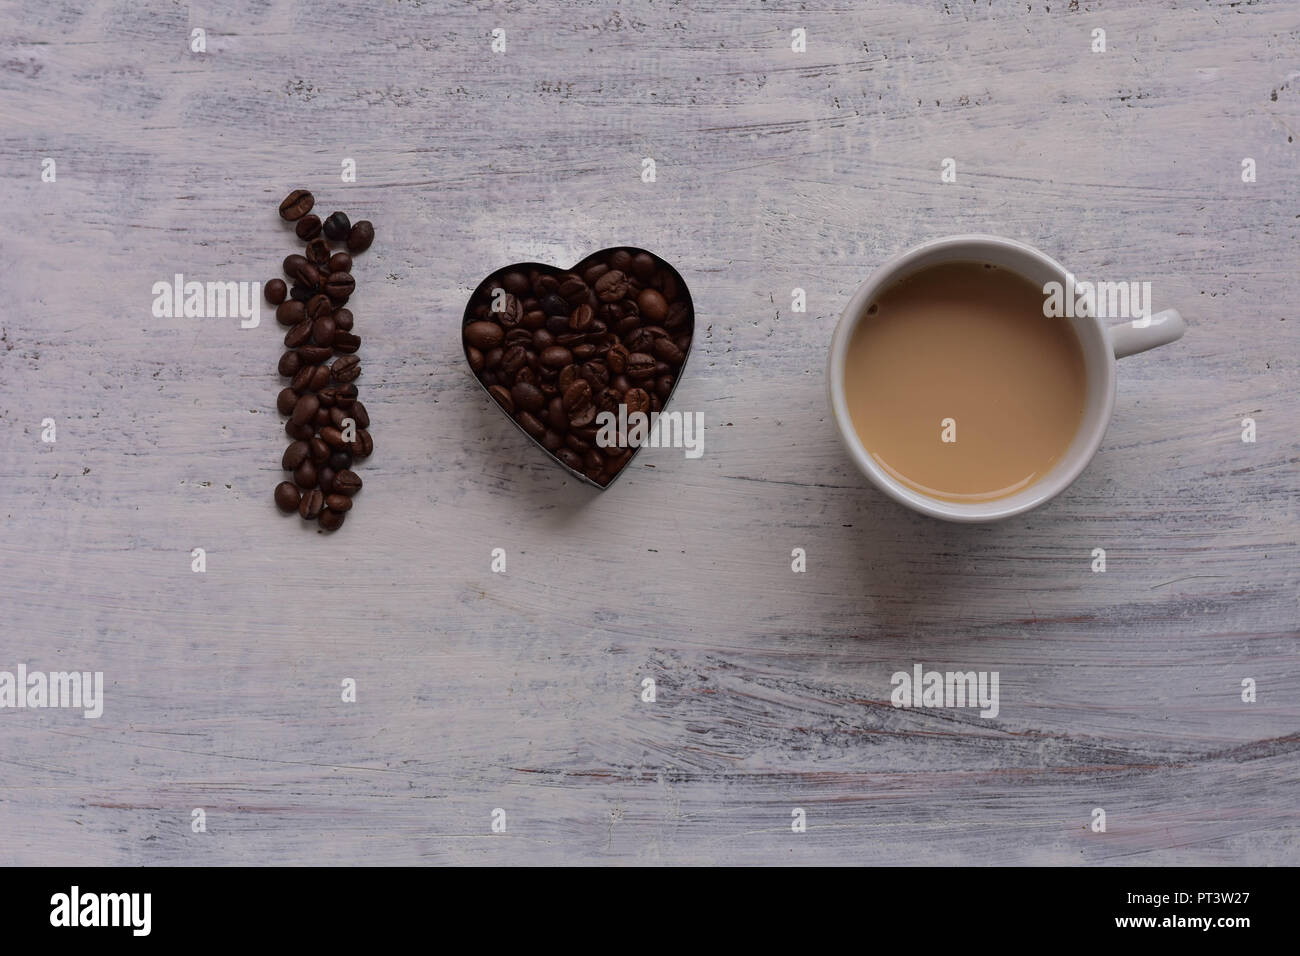 Cup op coffee and Heart shape roasted coffee beans on white rustic wooden table/ Romantic still life food design/ I love coffee Stock Photo